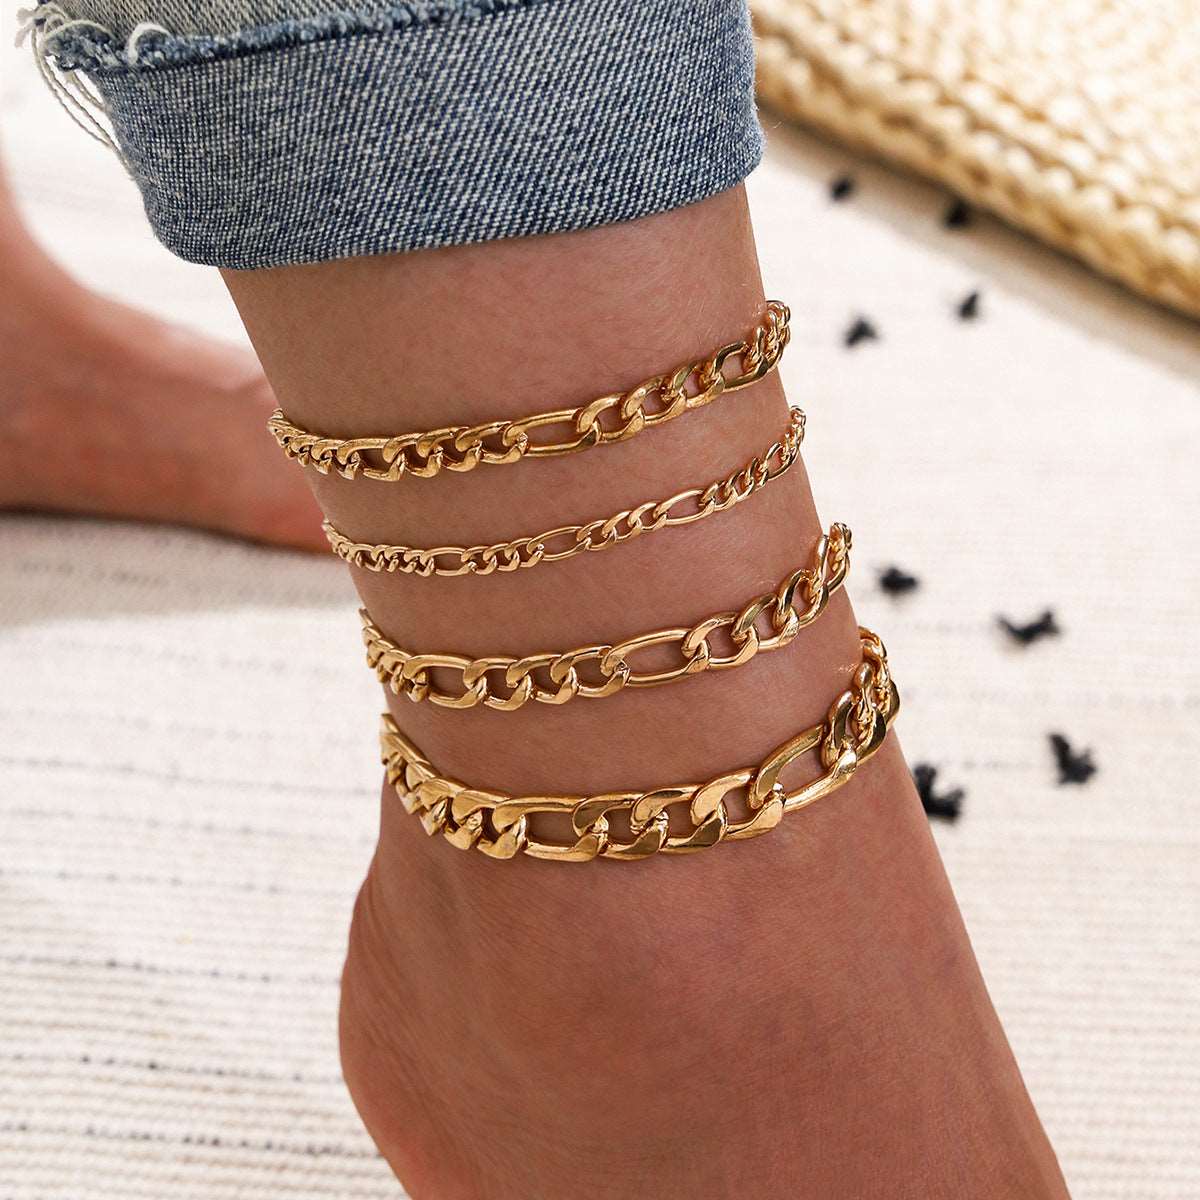 5 Pcs Women Fashion Gold Color Heart Crystal Key Anklets For Women Trendy Snake Chain Anklets For Women Foot Jewelry Gifts Angelwarriorfitness.com